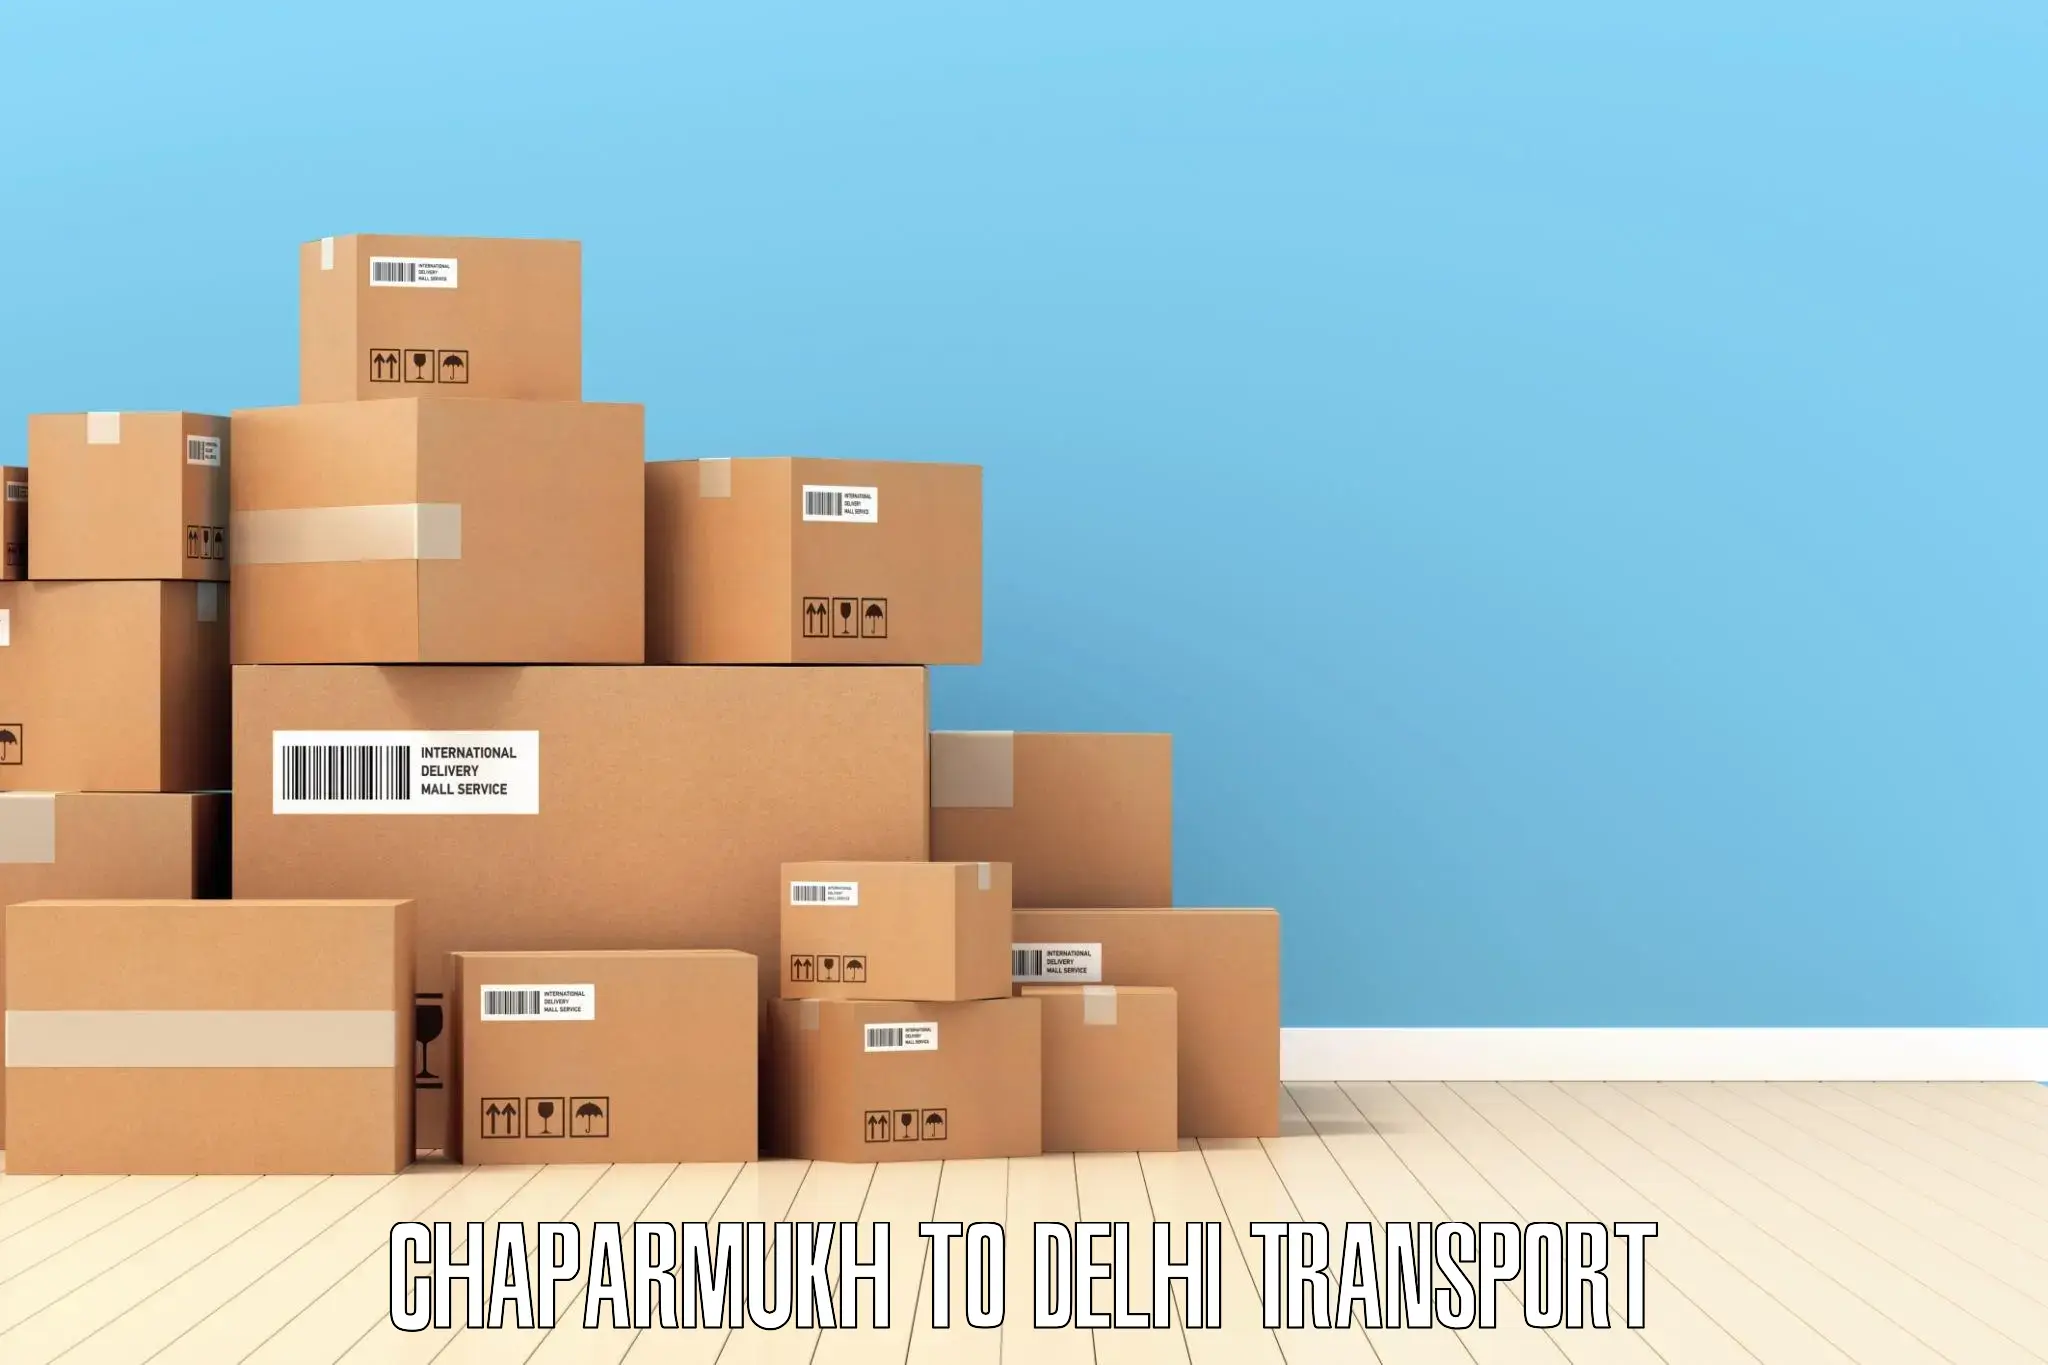 Air cargo transport services Chaparmukh to Delhi